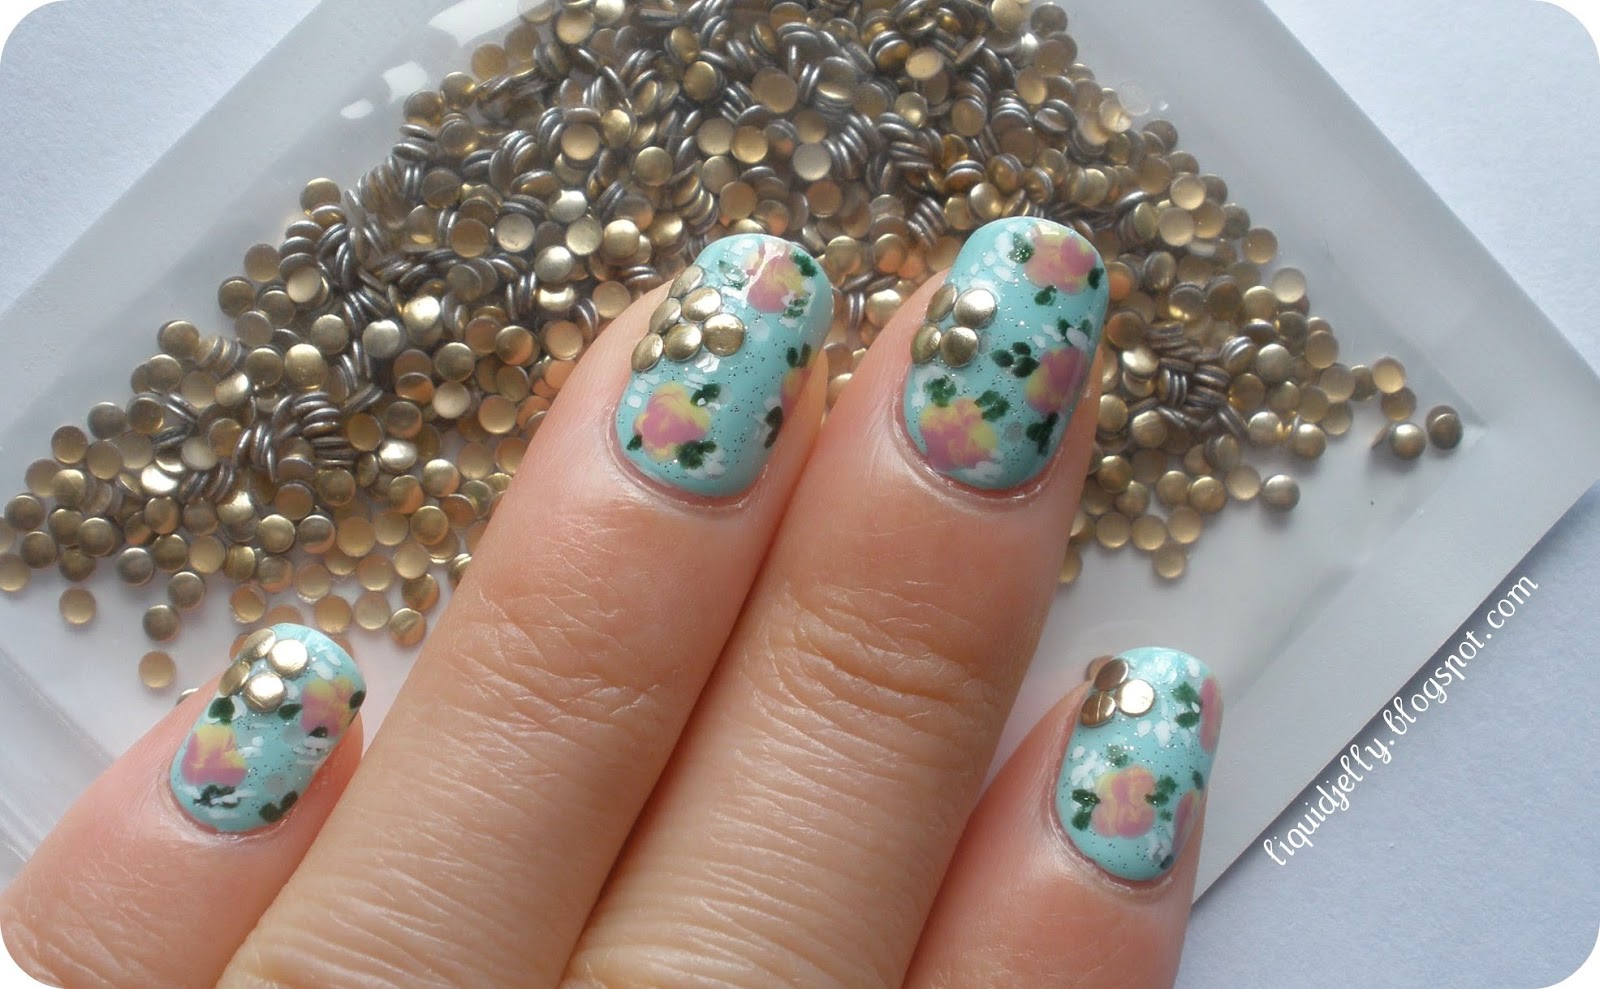 1. Daisy Nail Art with Studs Tutorial - wide 2